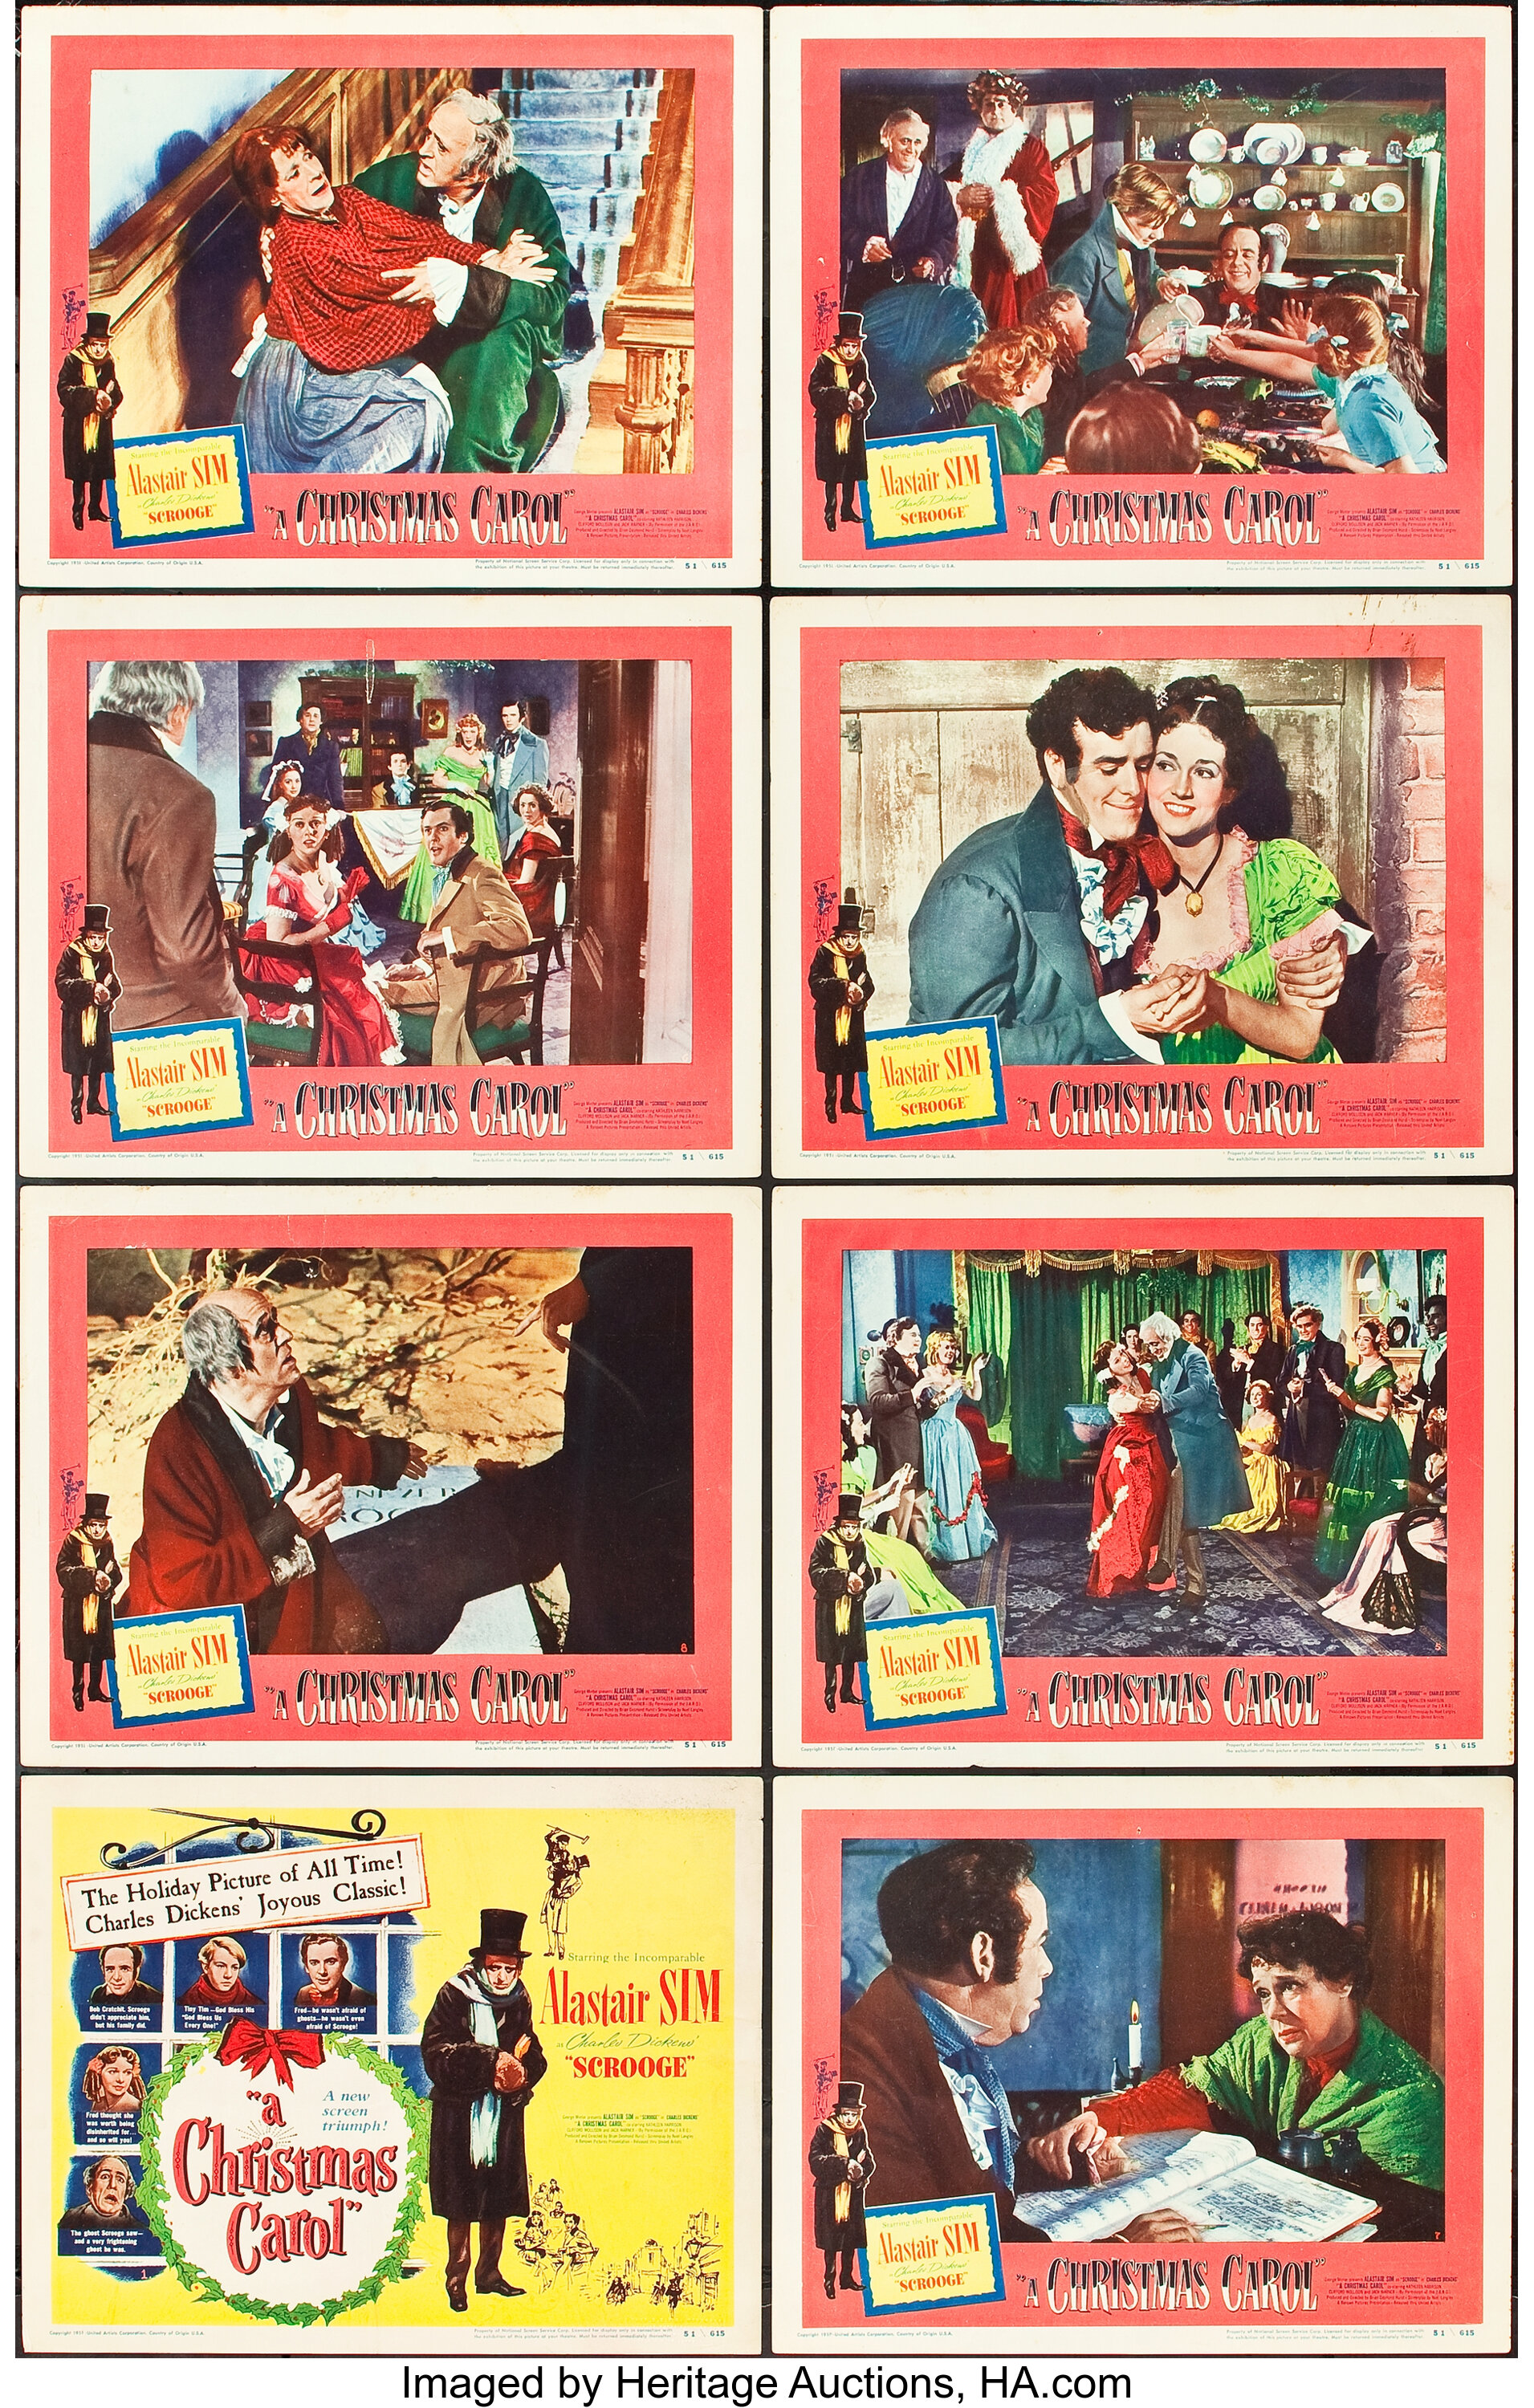 A Christmas Carol United Artists 1951 Lobby Card Set Of 8 11 Lot 84138 Heritage Auctions 9021